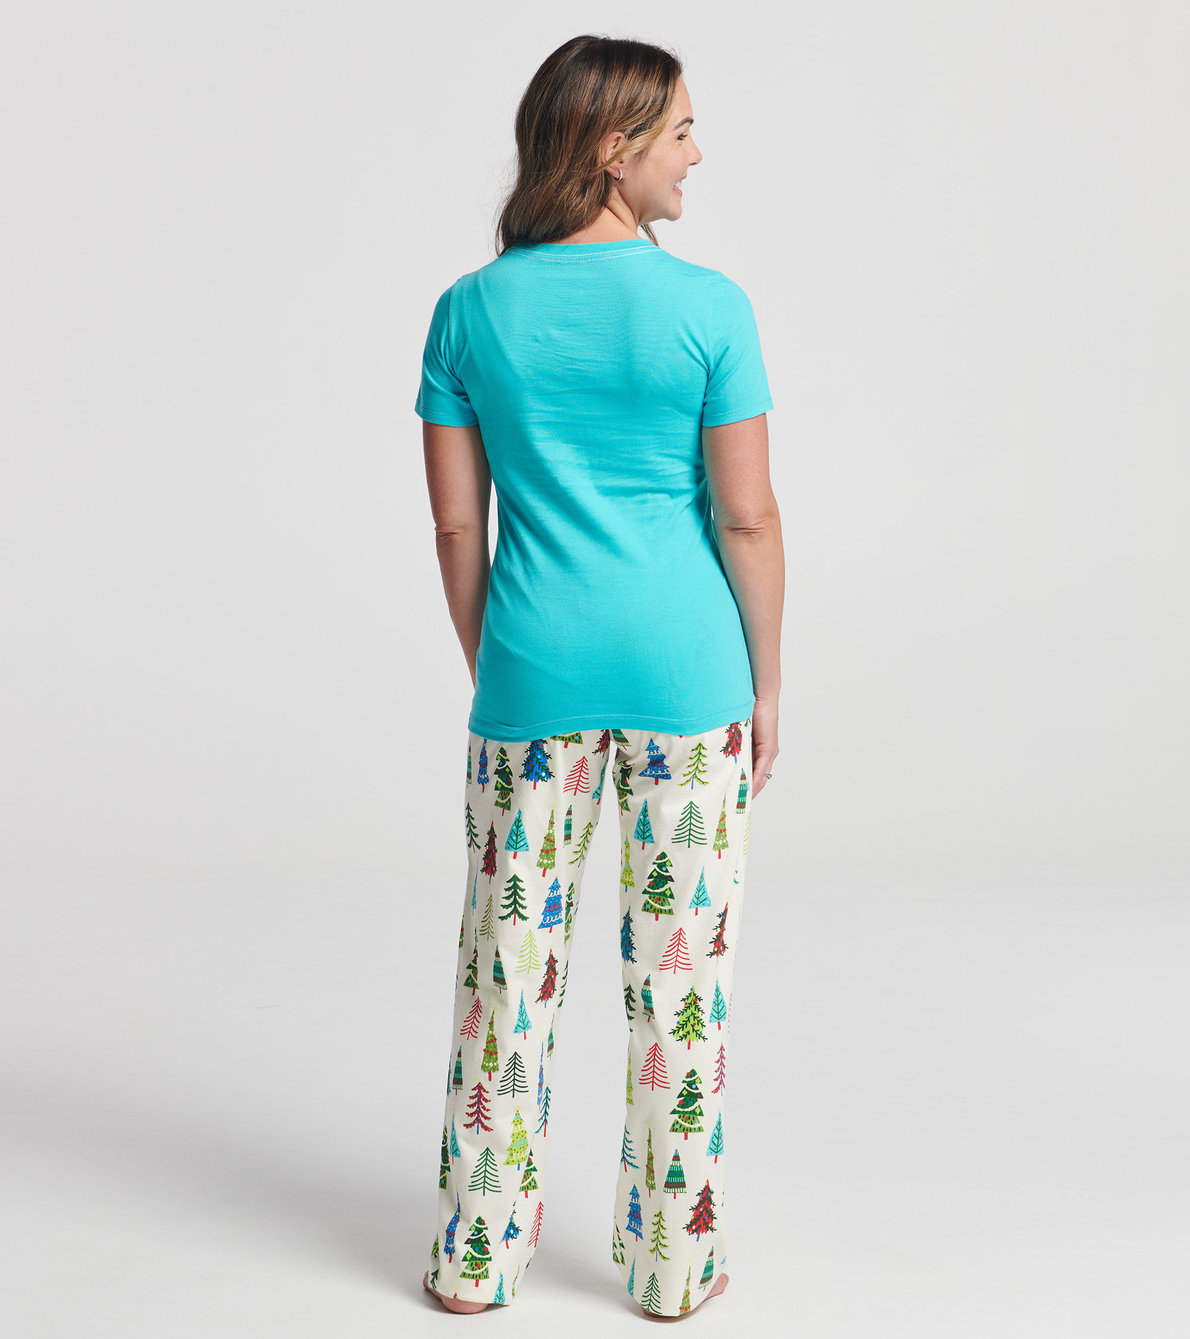 View larger image of Women's Christmas Trees Jersey Pajama Pants